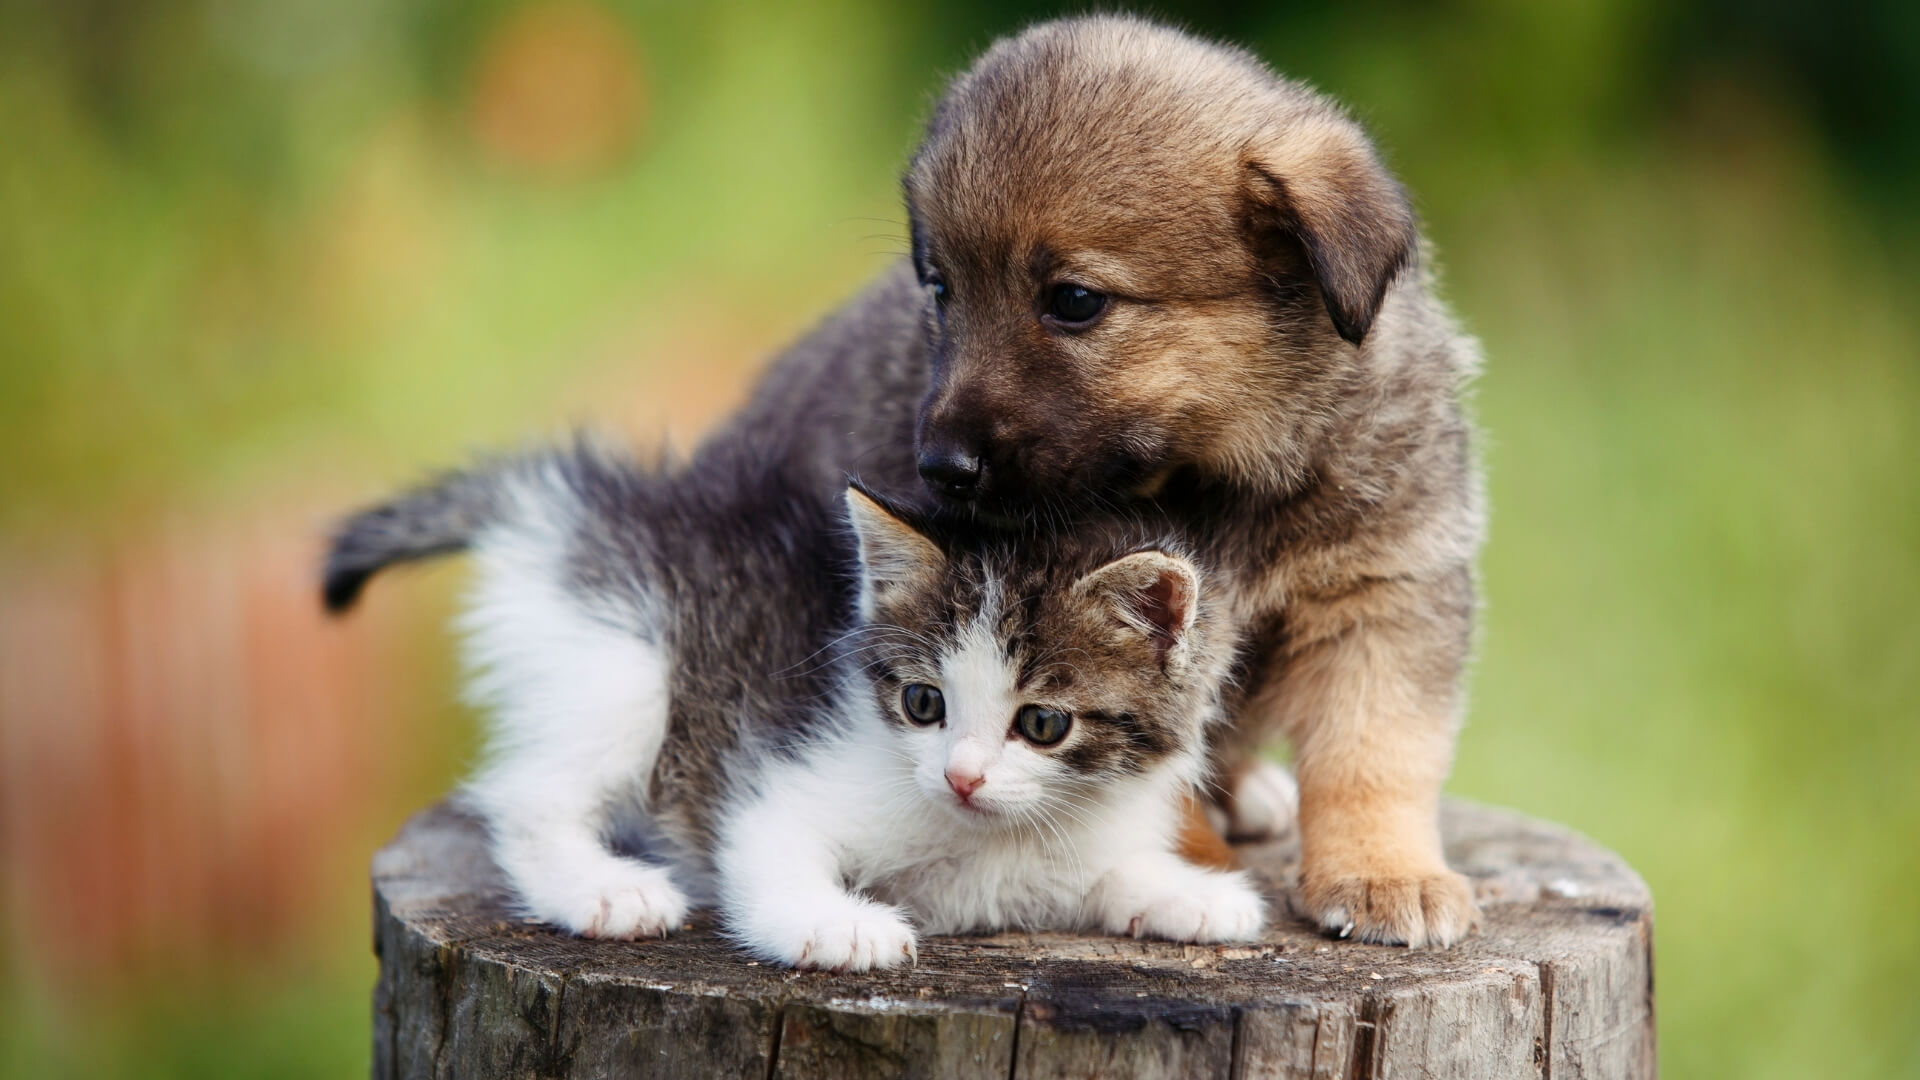 A Puppy and Kitten on a Tree Stump